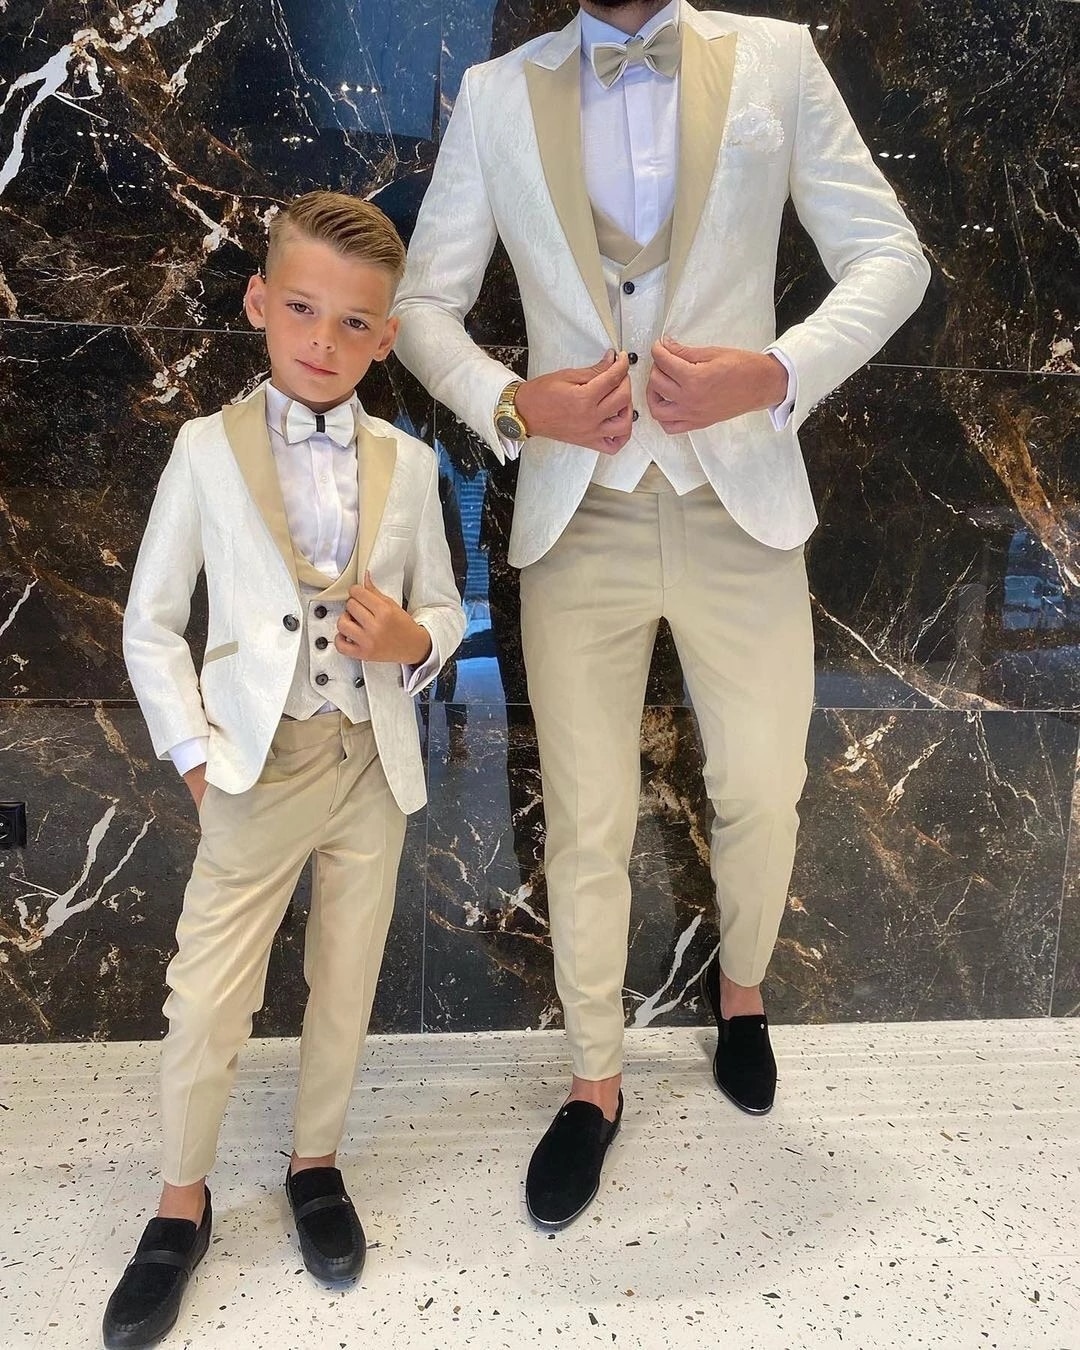 Newest Pattern Father And Son Men Suits Wedding Prom Groom Tuxedos Terno Masculino Slim Fit Blazer 3 Pieces Jacket+Pant+Vest